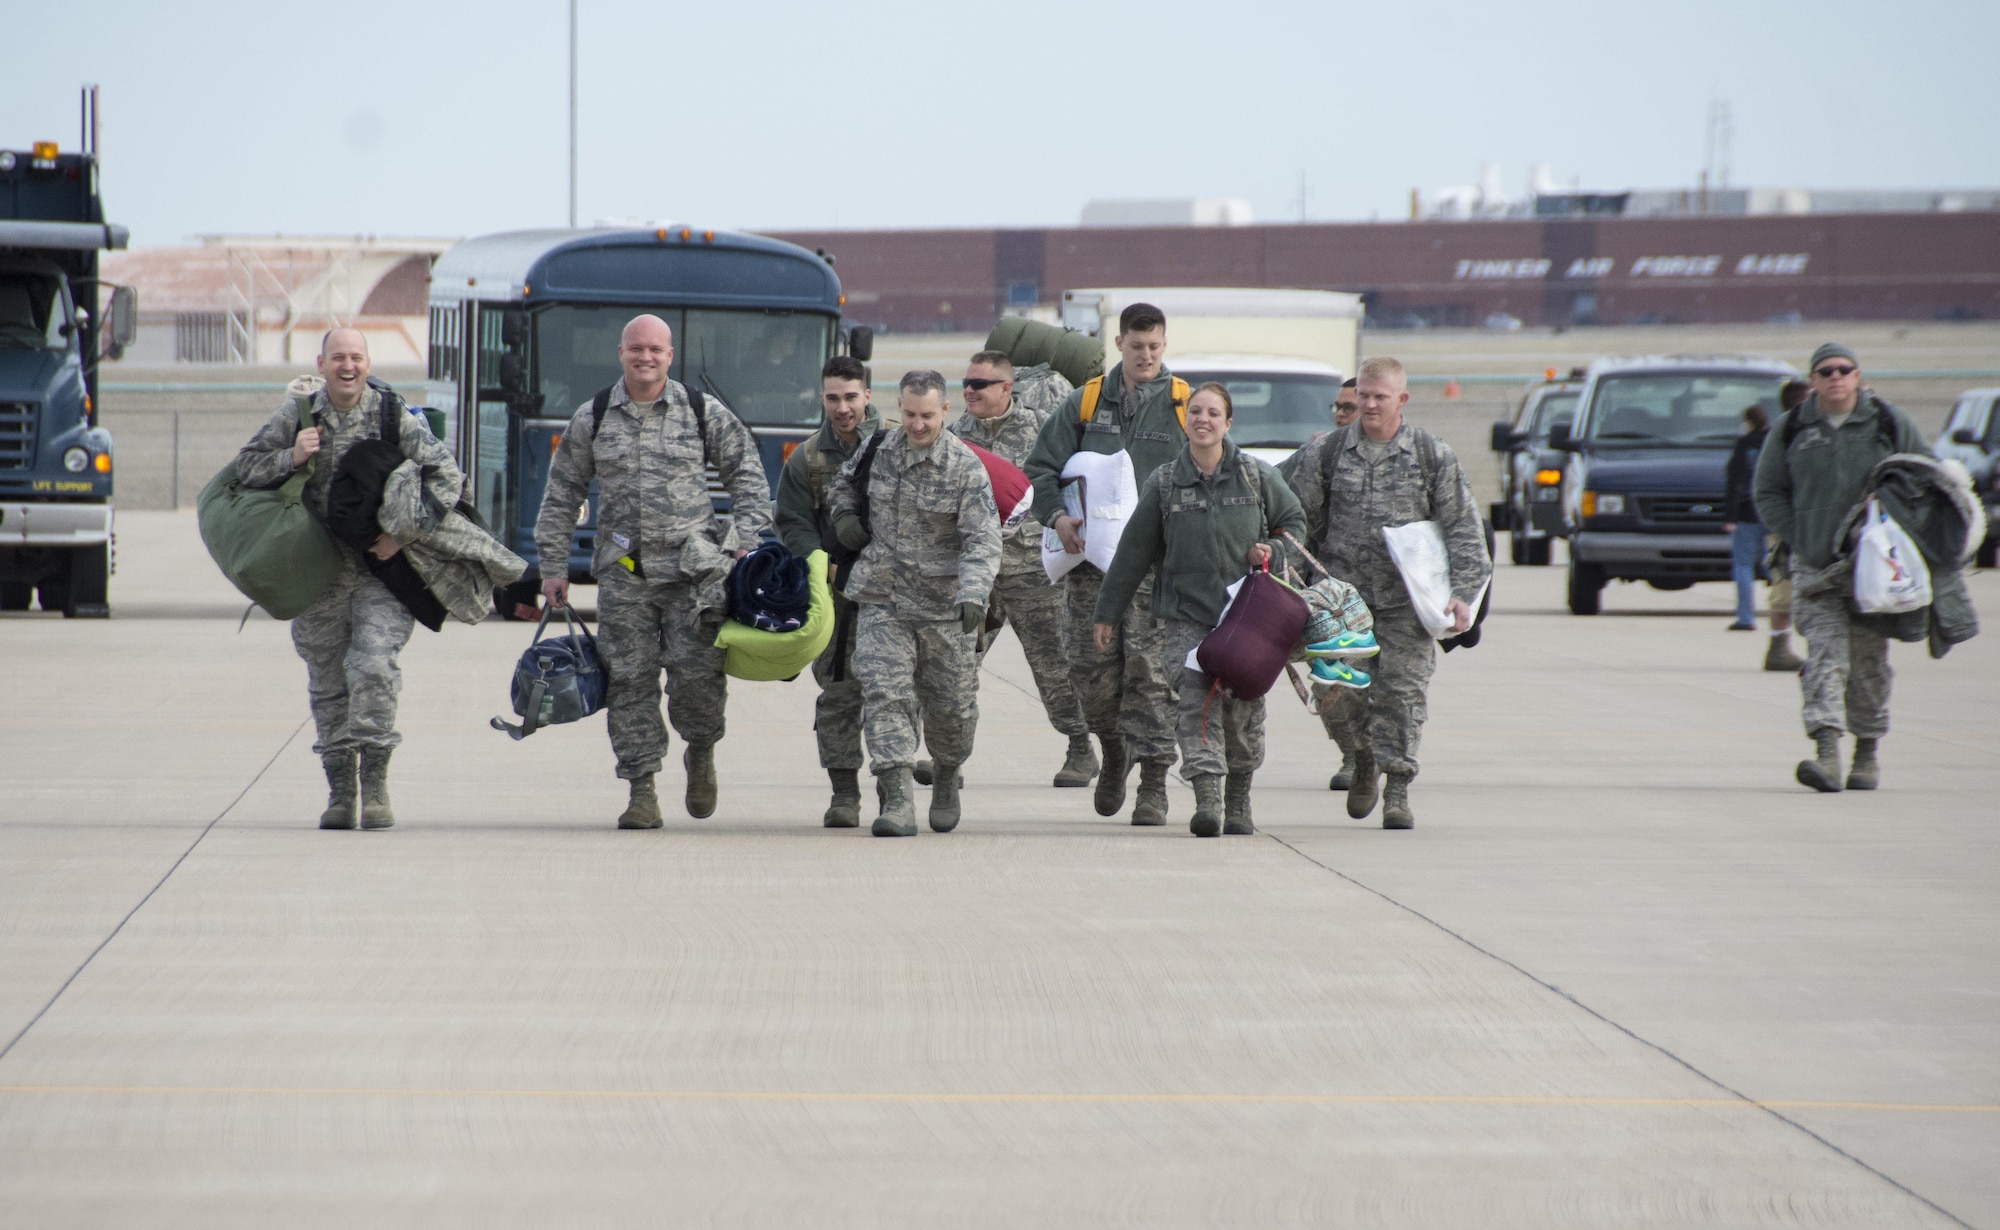 Reservists from the 507th Air Refueling Wing return home following a deployment Feb. 17, 2017, at Tinker Air Force Base, Okla. More than 90 other Reservists deployed in December 2016 in support of air operations at Incirlik Air Base, Turkey, against the Islamic State group. (U.S. Air Force photo/Tech. Sgt. Lauren Gleason)